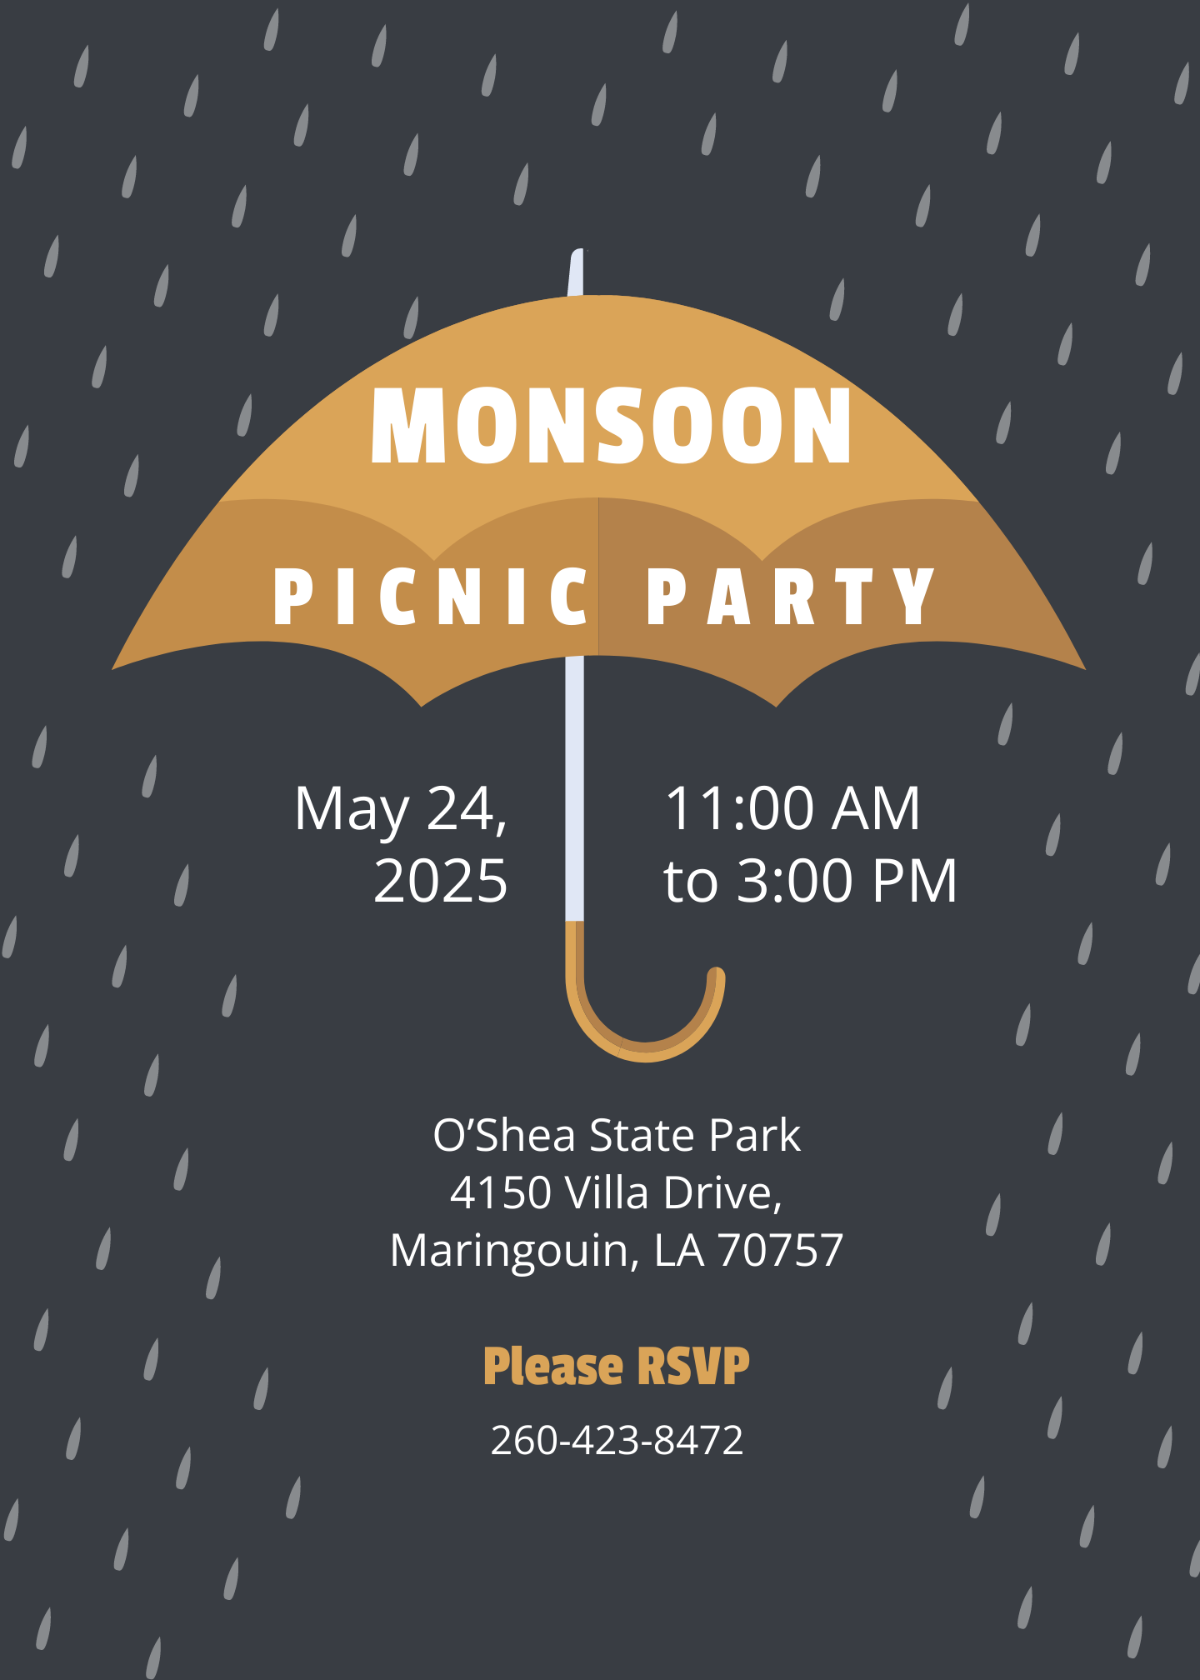 Free Monsoon Picnic Party Invitation Template